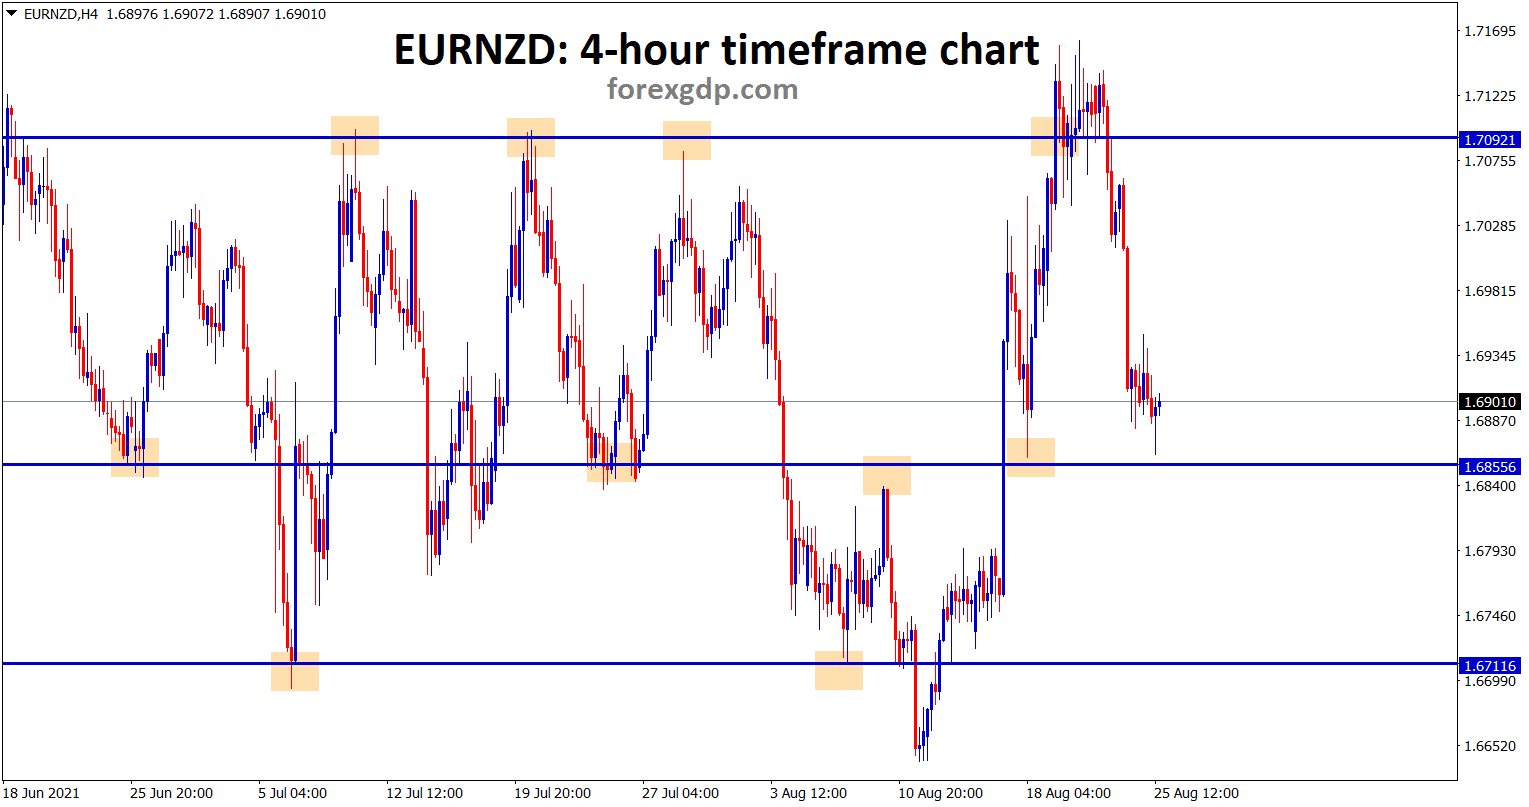 EURNZD bounces back from the minor support area currently its ranging between the SR levels